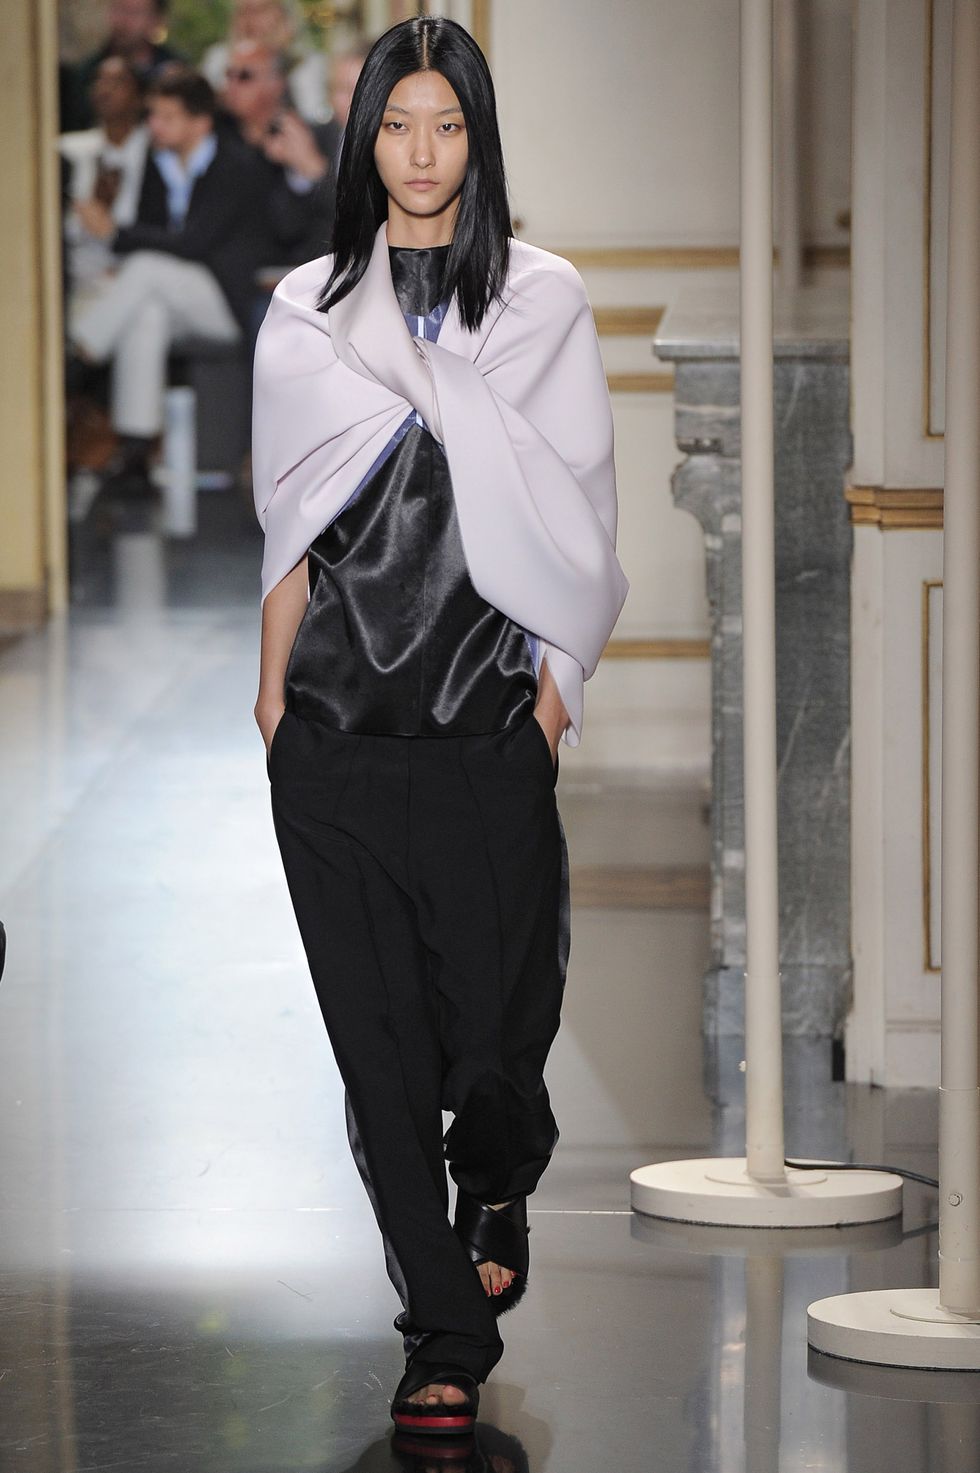 Phoebe Philo Designed 17 Runway Collections at Céline, Here Are